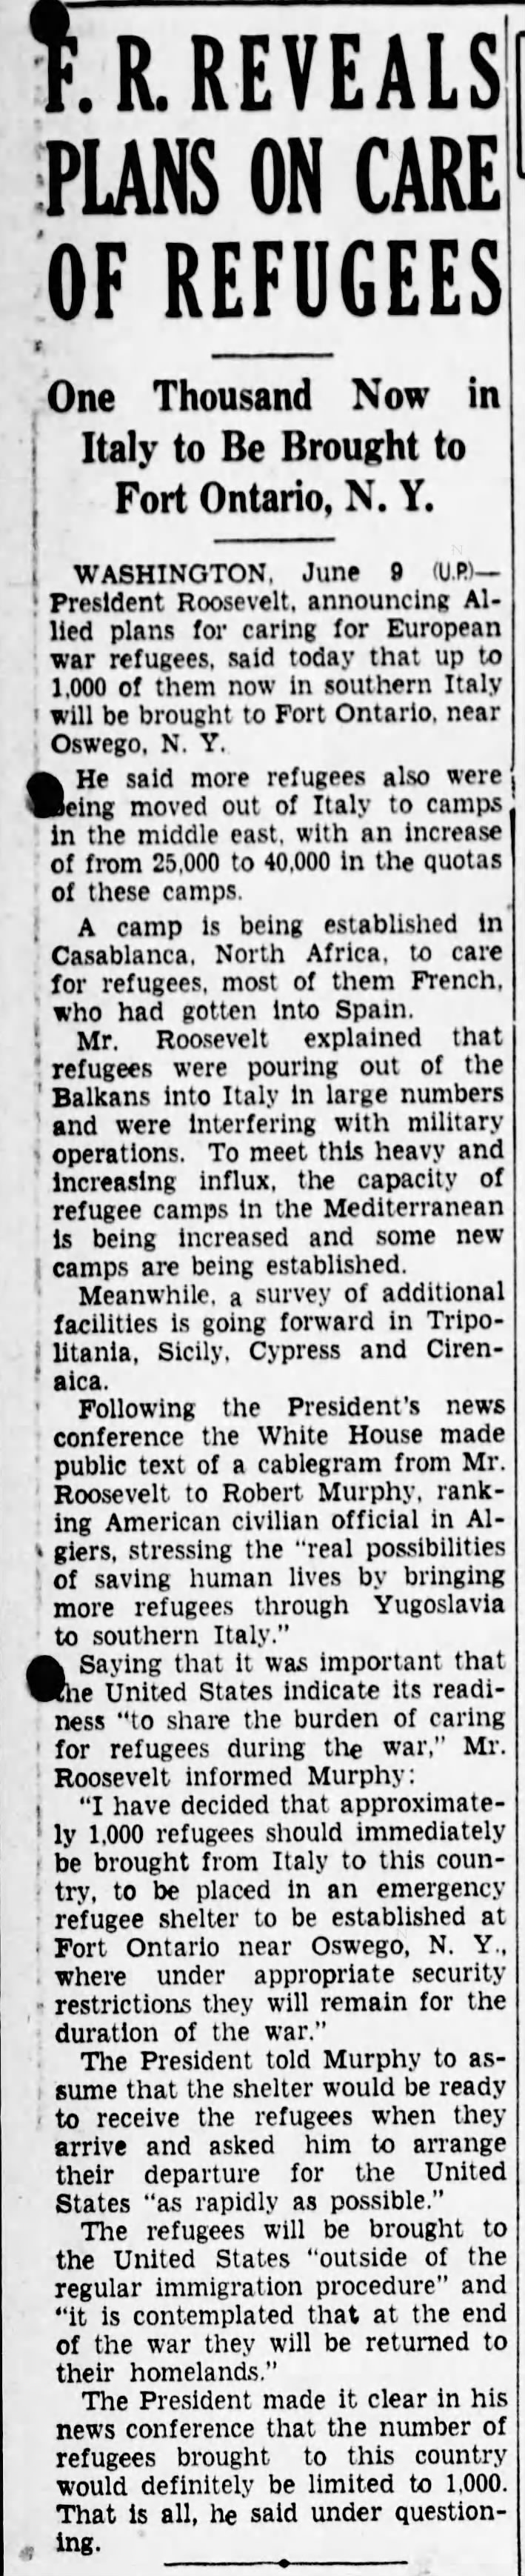 F.R. Reveals Plans on Care of Refugees (6/9/44)